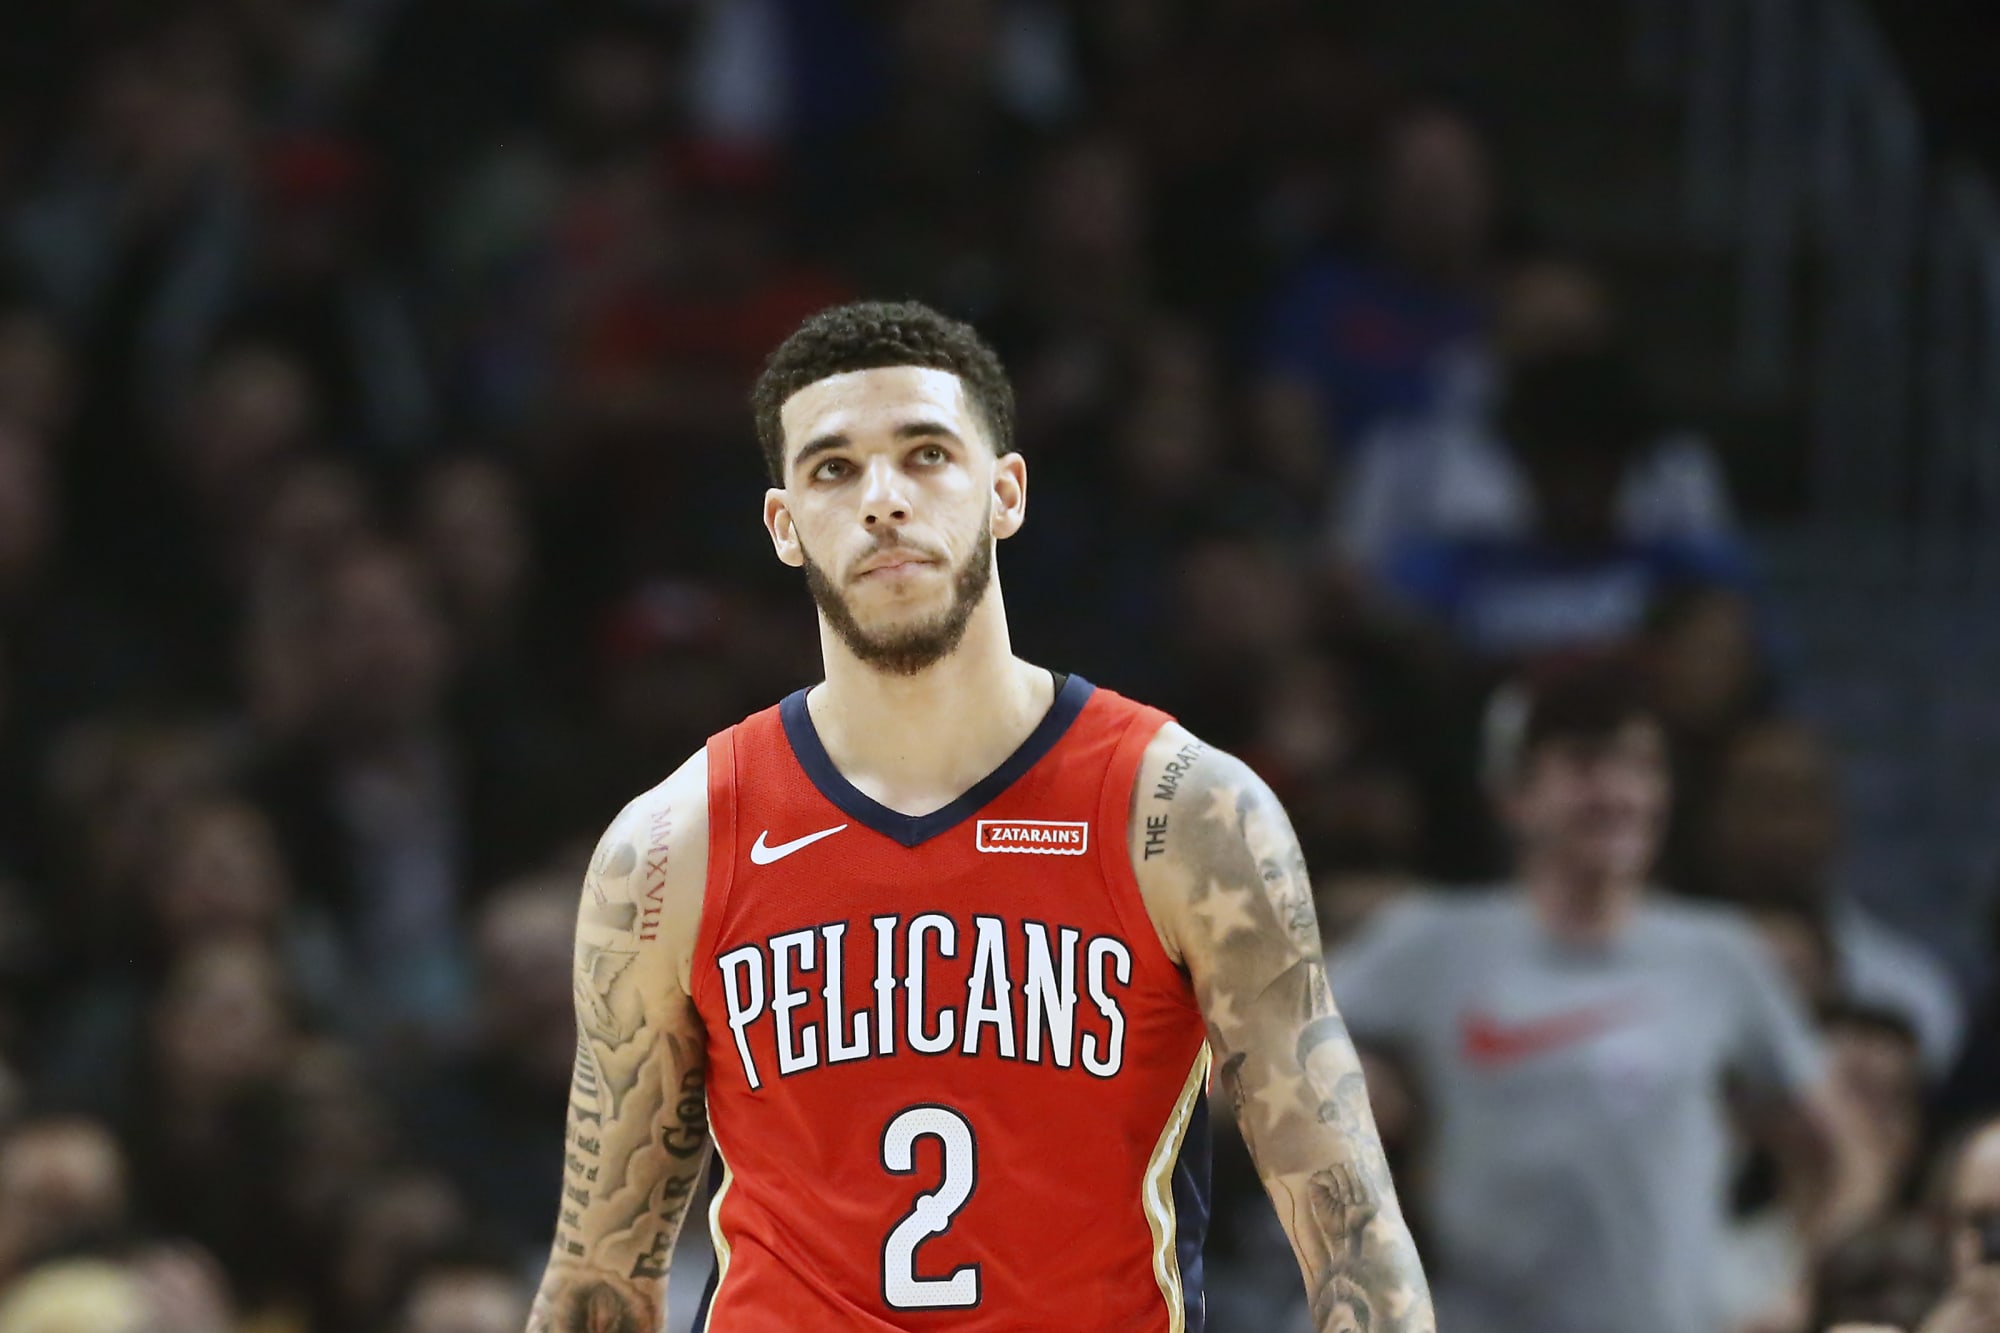 Download New Orleans Pelicans Lonzo Ball Wallpaper